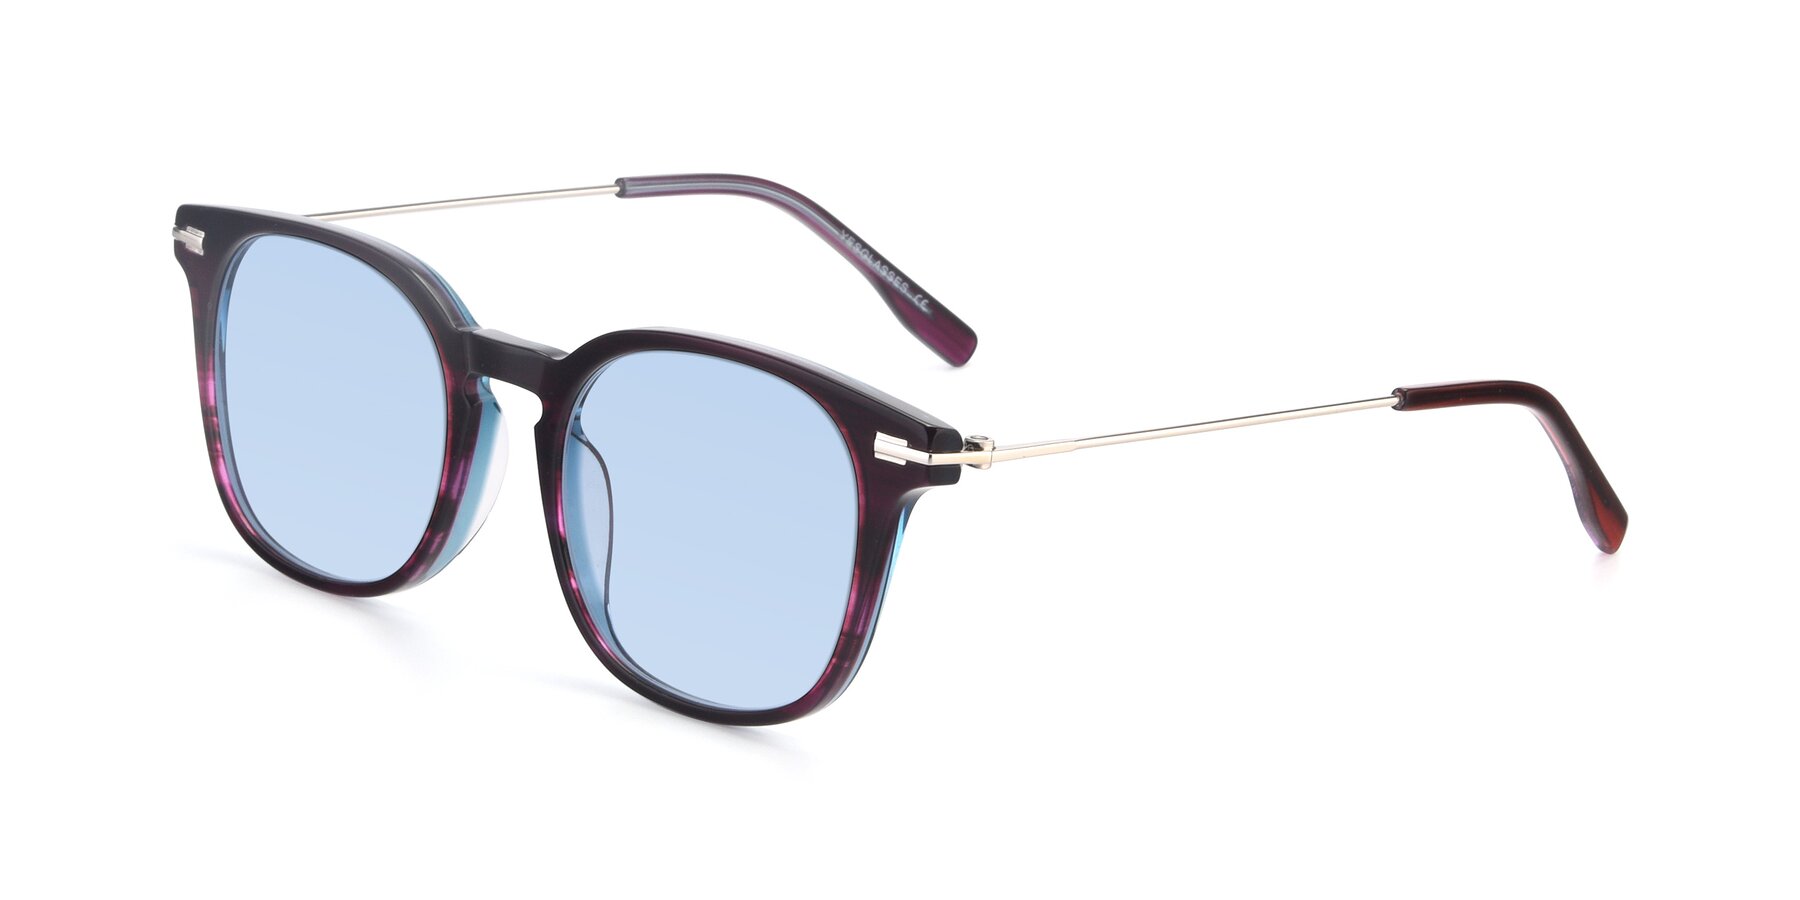 Angle of 17711 in Dark Purple with Light Blue Tinted Lenses